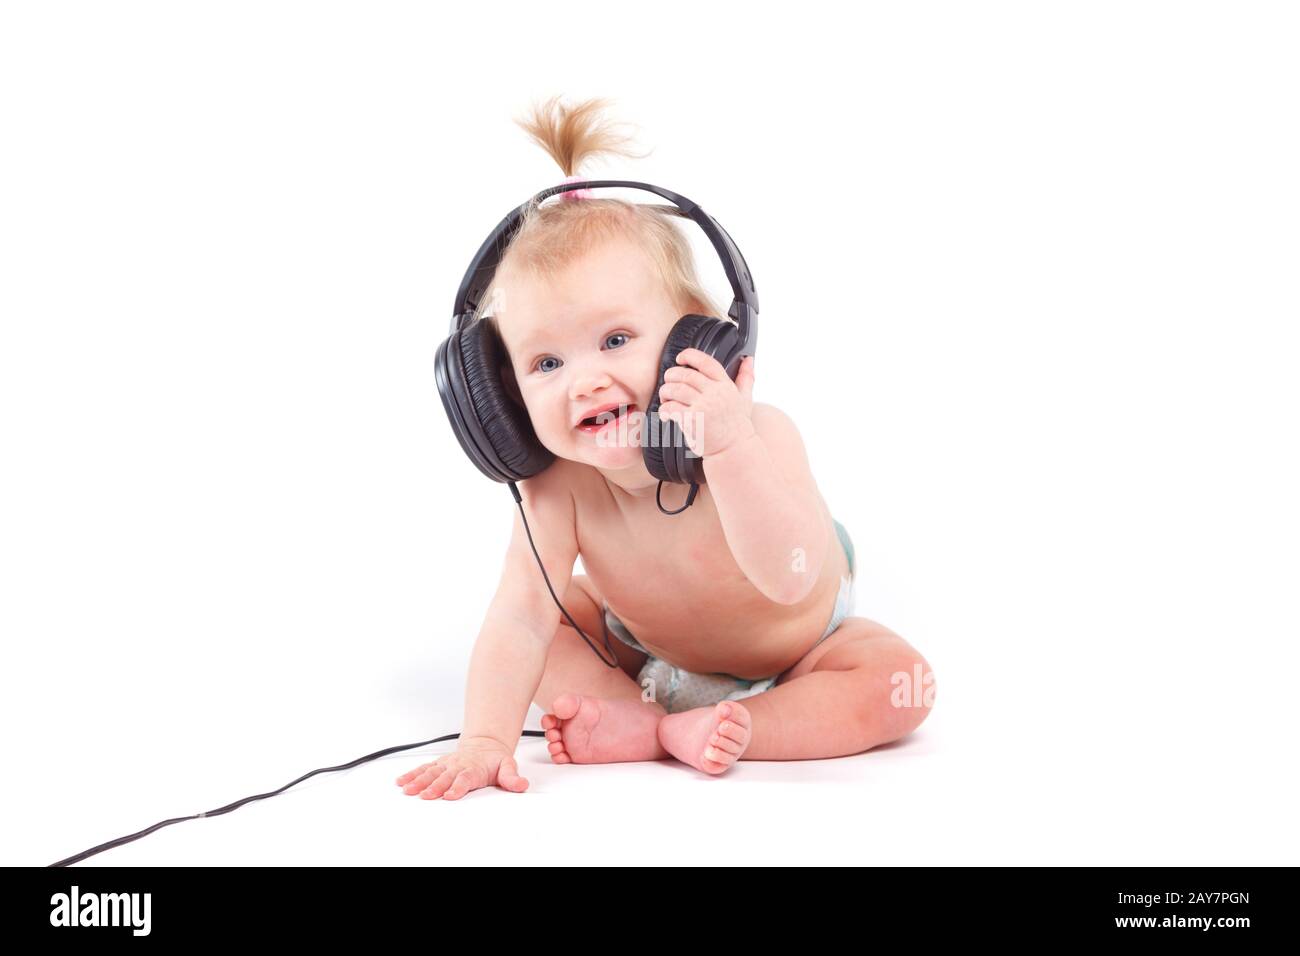 cute pretty baby girl in white diaper with headphones Stock Photo